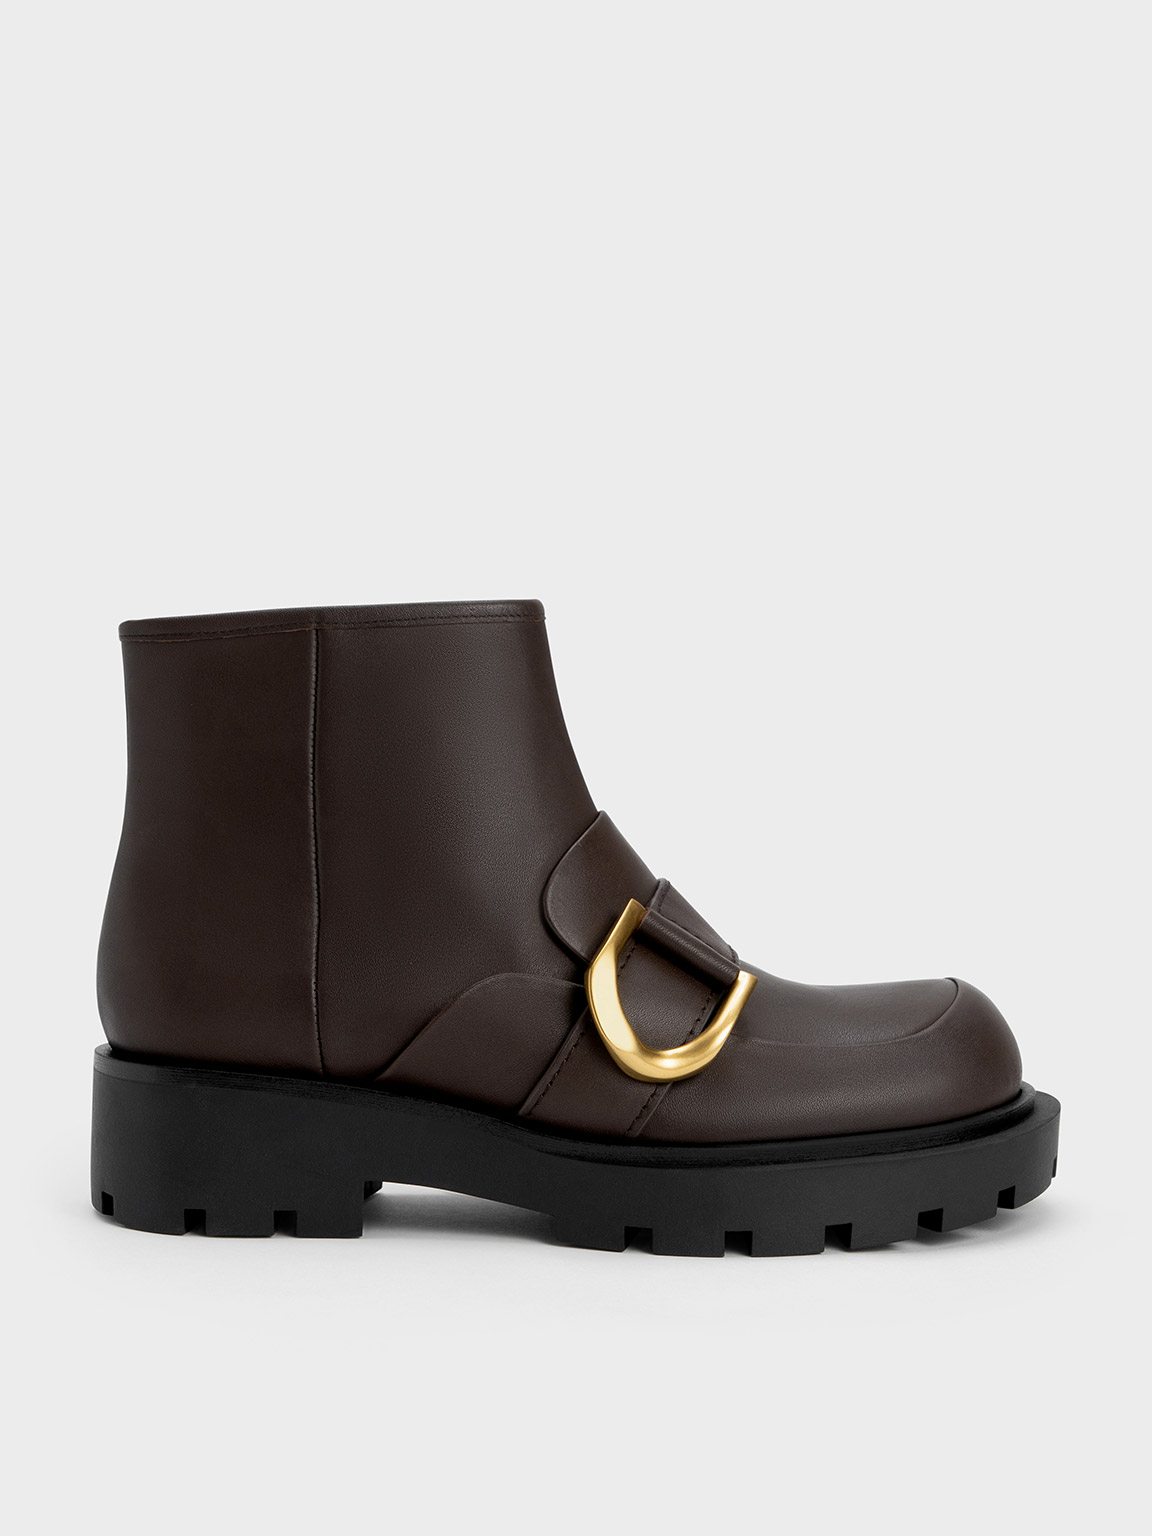 Charles & Keith Gabine Loafer Ankle Boots In Dark Brown